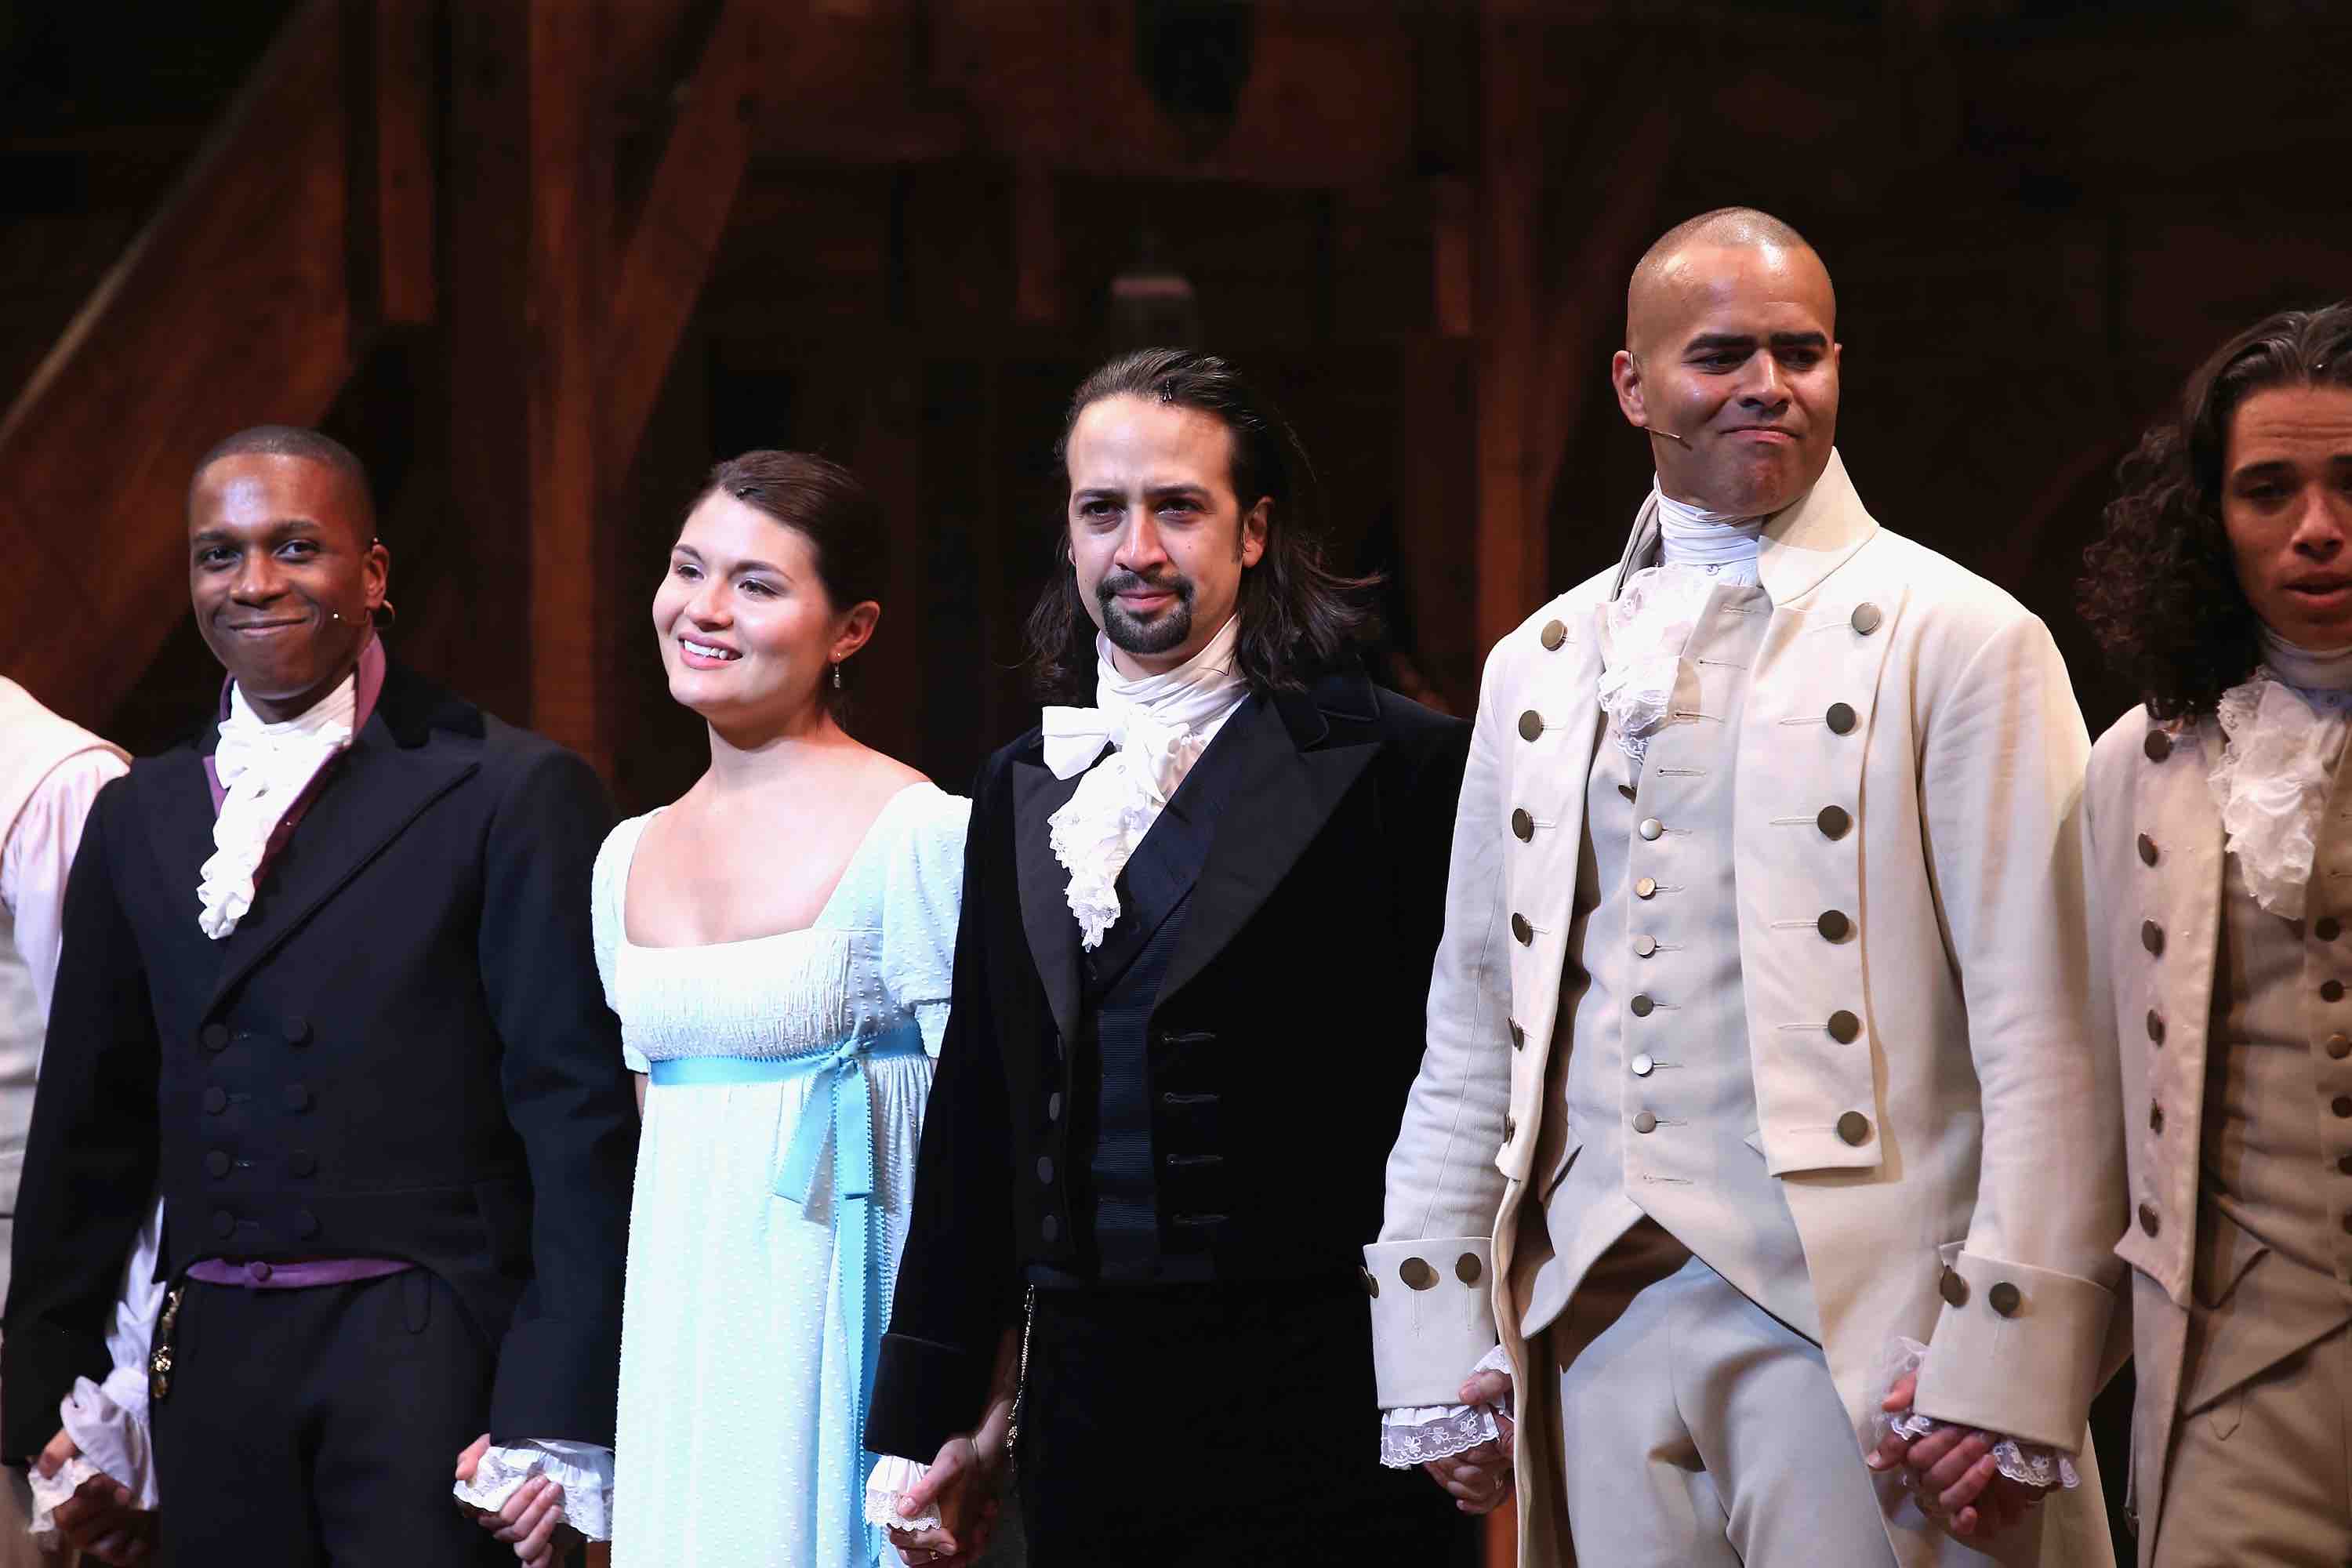 Leslie Odom; Jr., Phillipa Soo, Lin-Manuel Miranda and Christopher Jackson attend 'Hamilton' Broadway Opening Night at Richard Rodgers Theatre on August 6, 2015 in New York City. Photo by Neilson Barnard/Getty Images